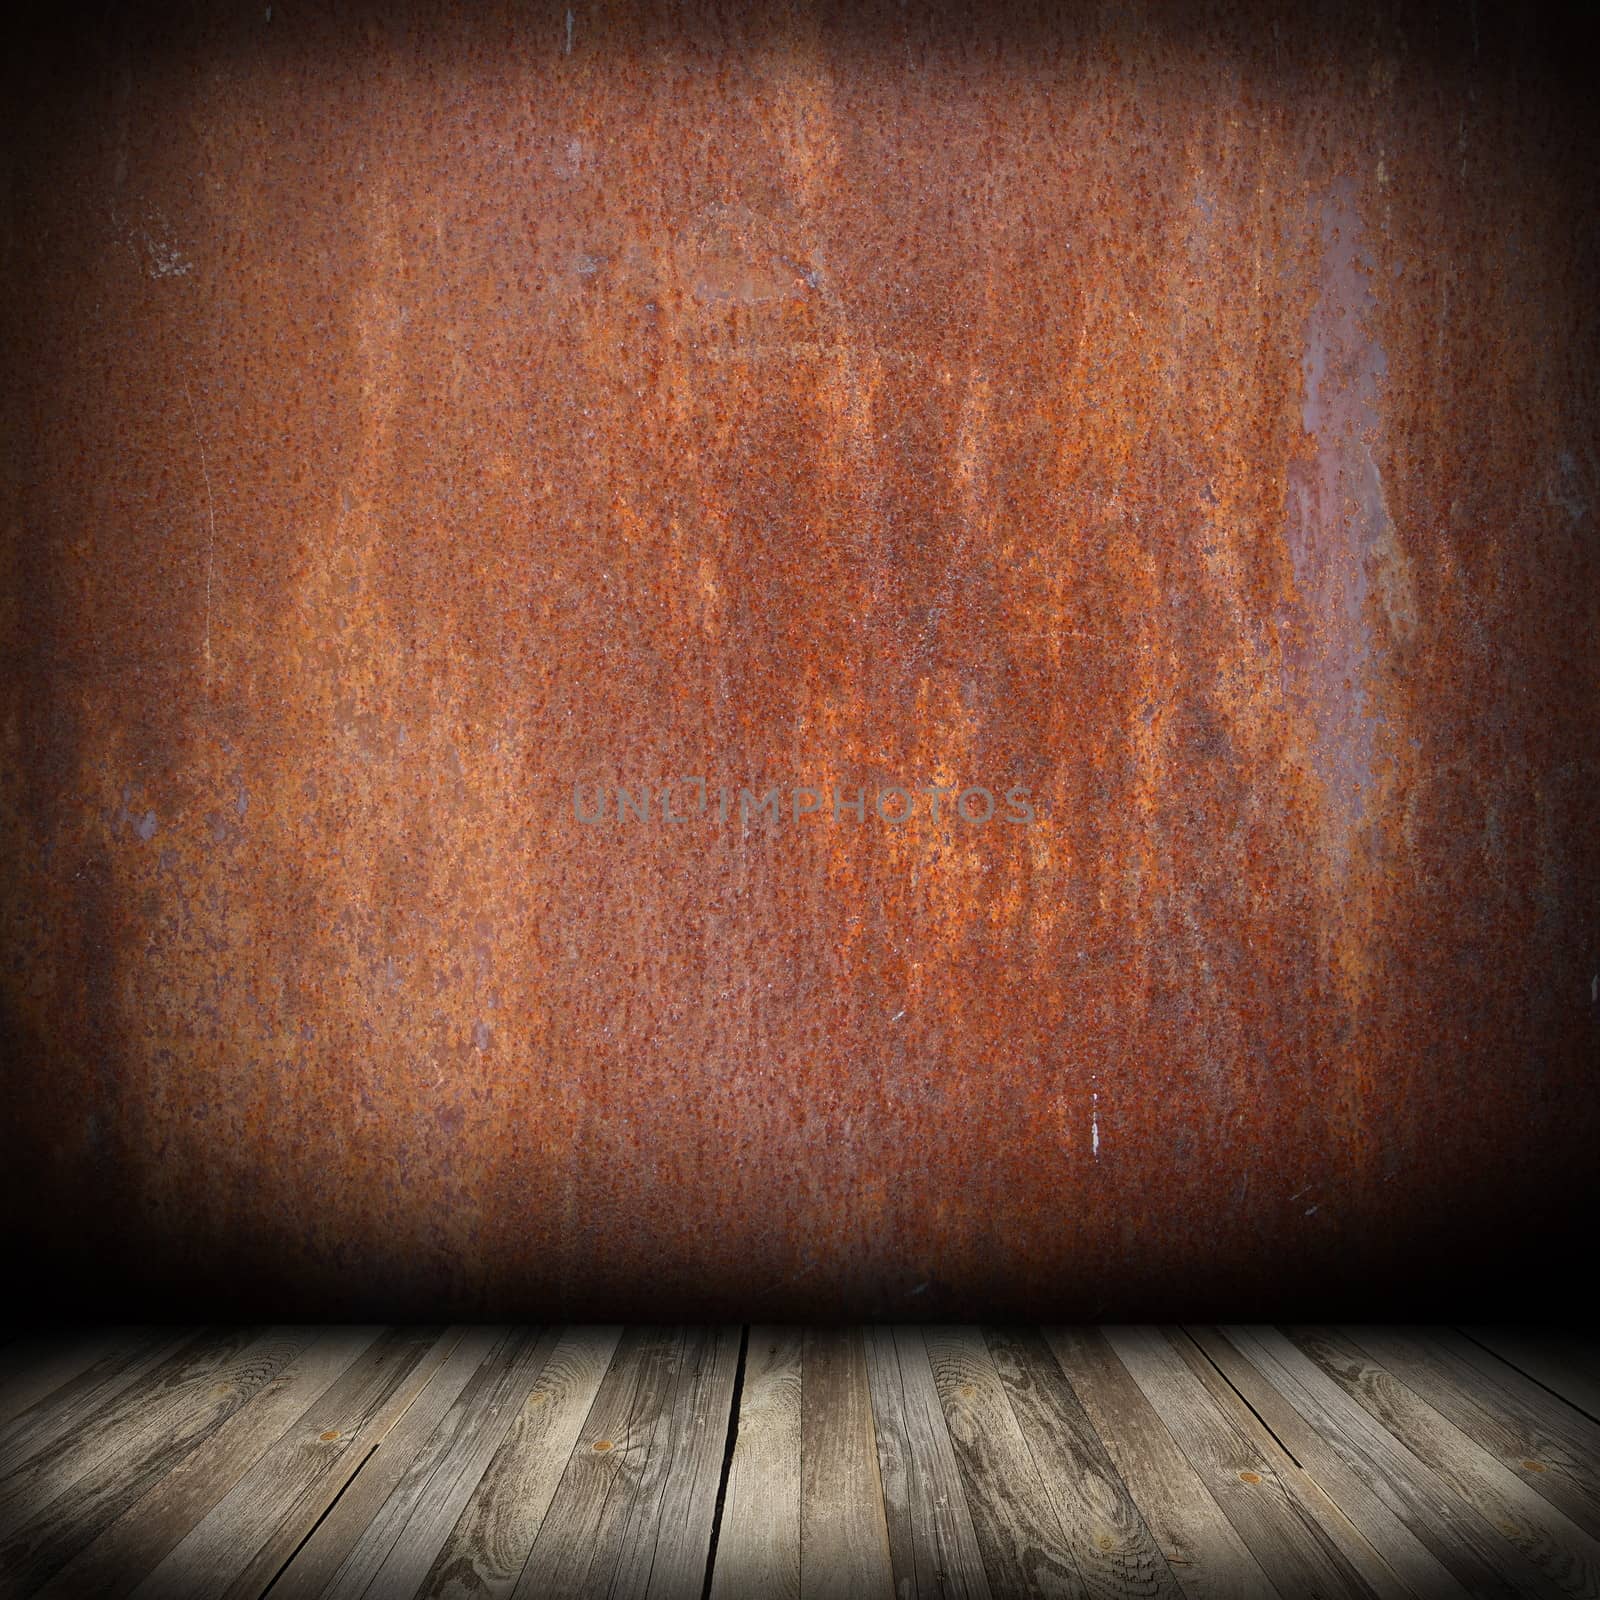 grunge architectural backdrop with wood floor and rusty wall